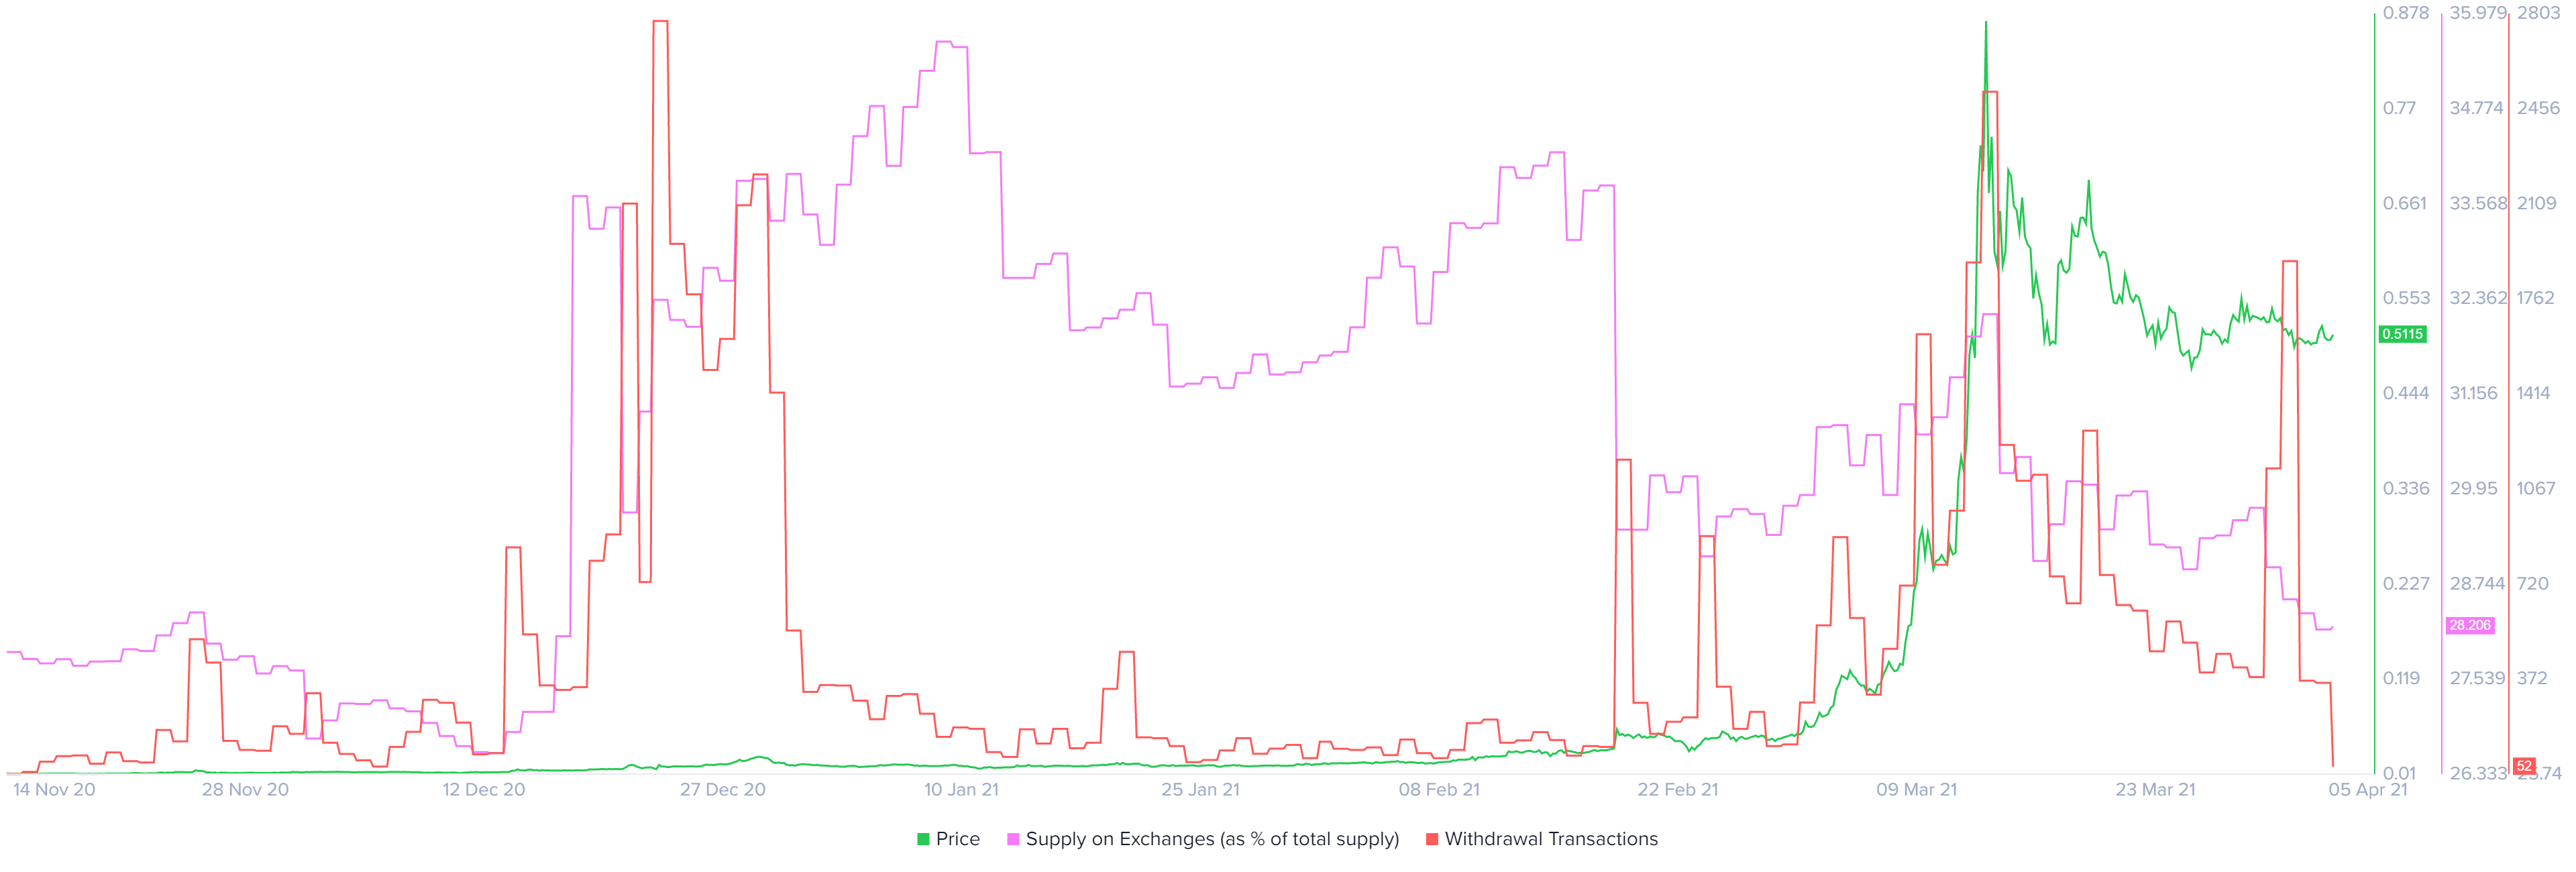 Chiliz exchange supply and withdrawal transactions chart